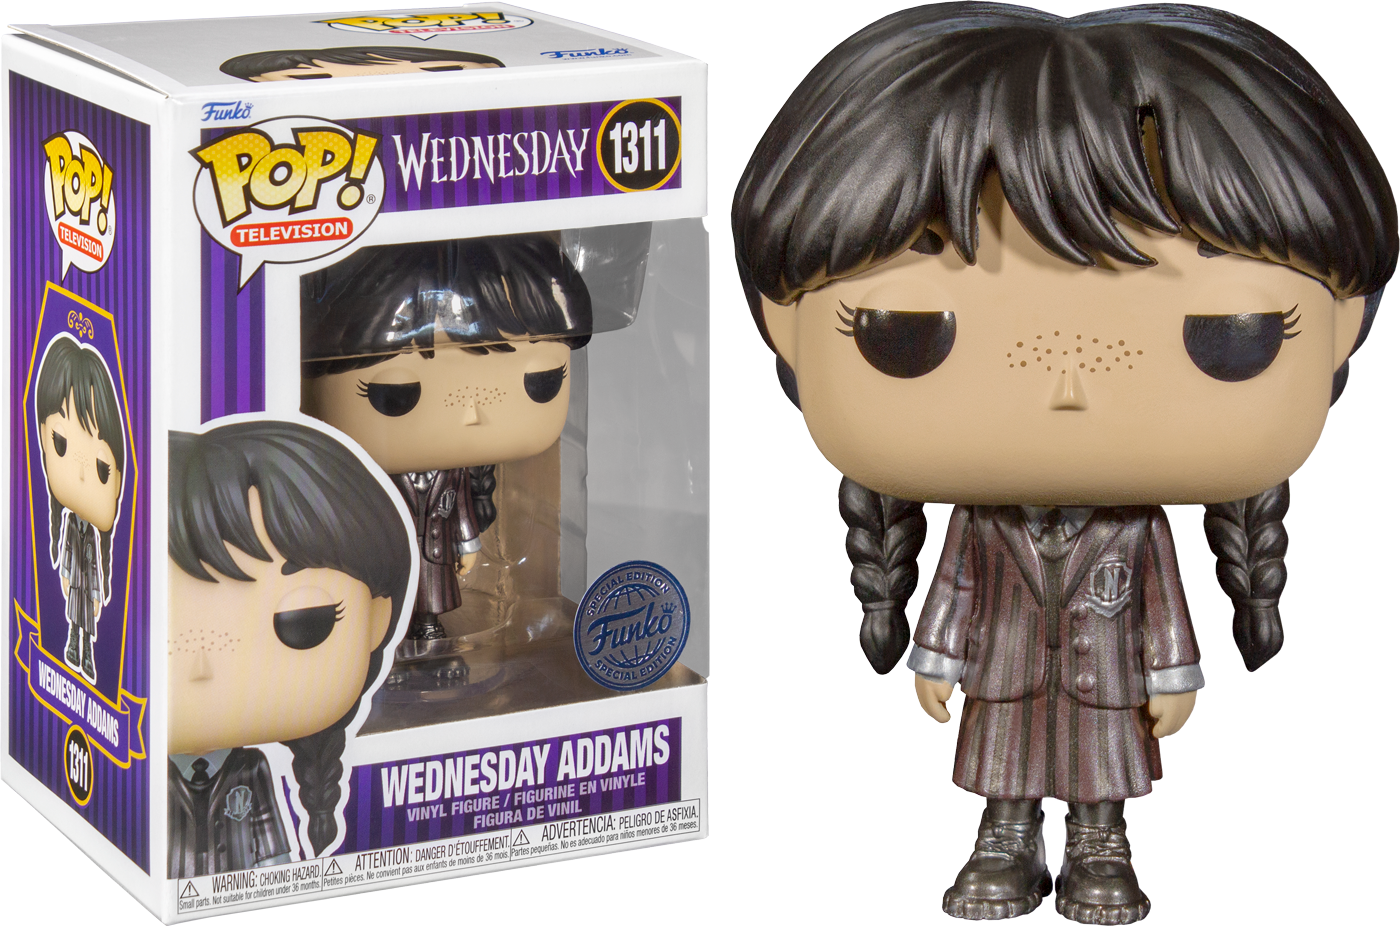 NYCC 2022: Exclusive Reveal of Funko's Mysterious and Spooky Wednesday  Addams Pop! Vinyl Figures Based on New Netflix Series WEDNESDAY - Daily Dead